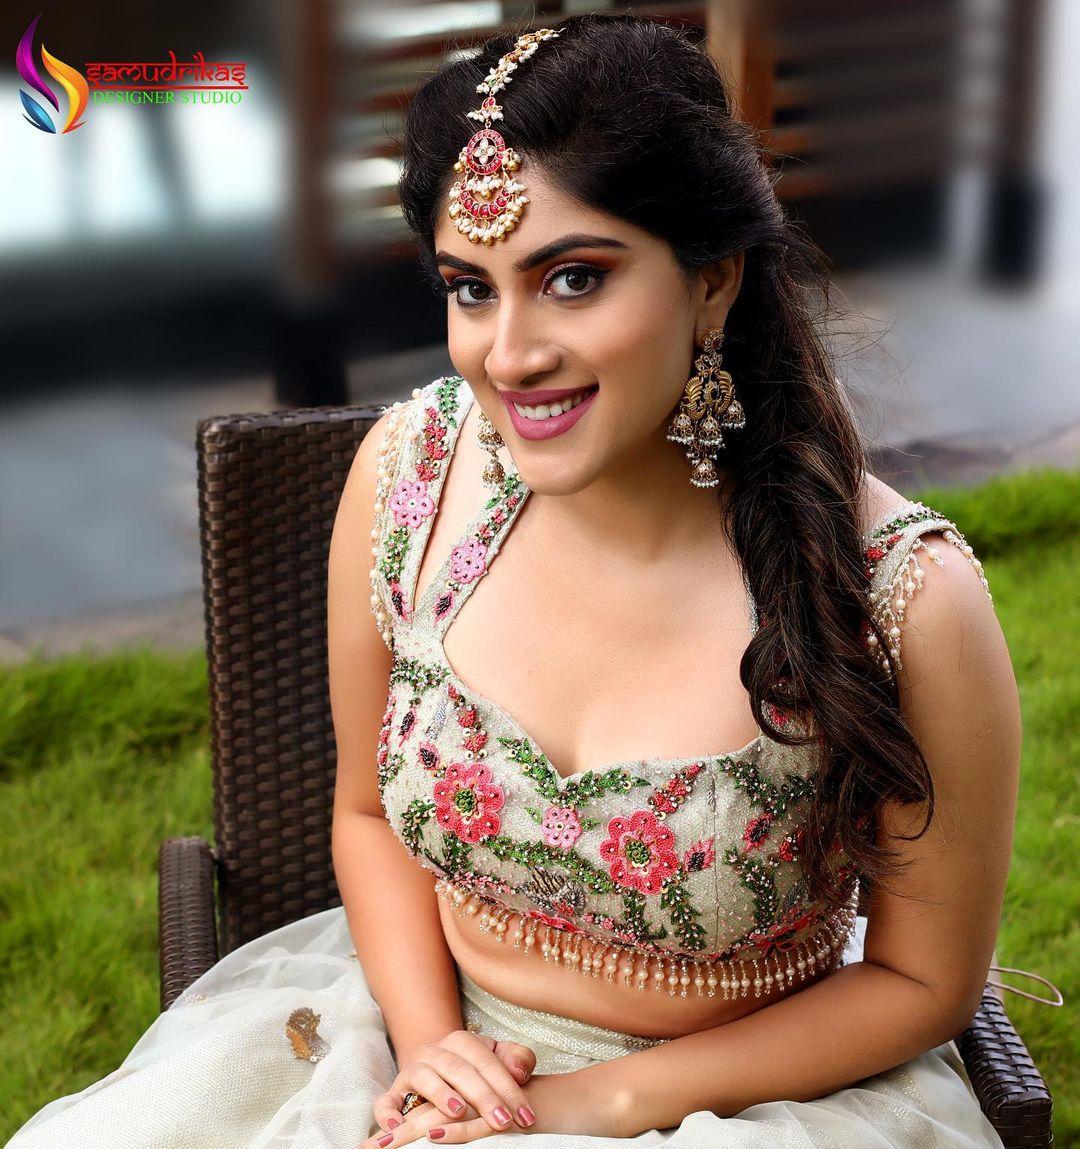 Model Dhanya Balakrishna looking very attractive hot photos | Dhanya  Balakrishna exposing hot cleavage photo gallery Photos: HD Images,  Pictures, Stills, First Look Posters of Model Dhanya Balakrishna looking  very attractive hot